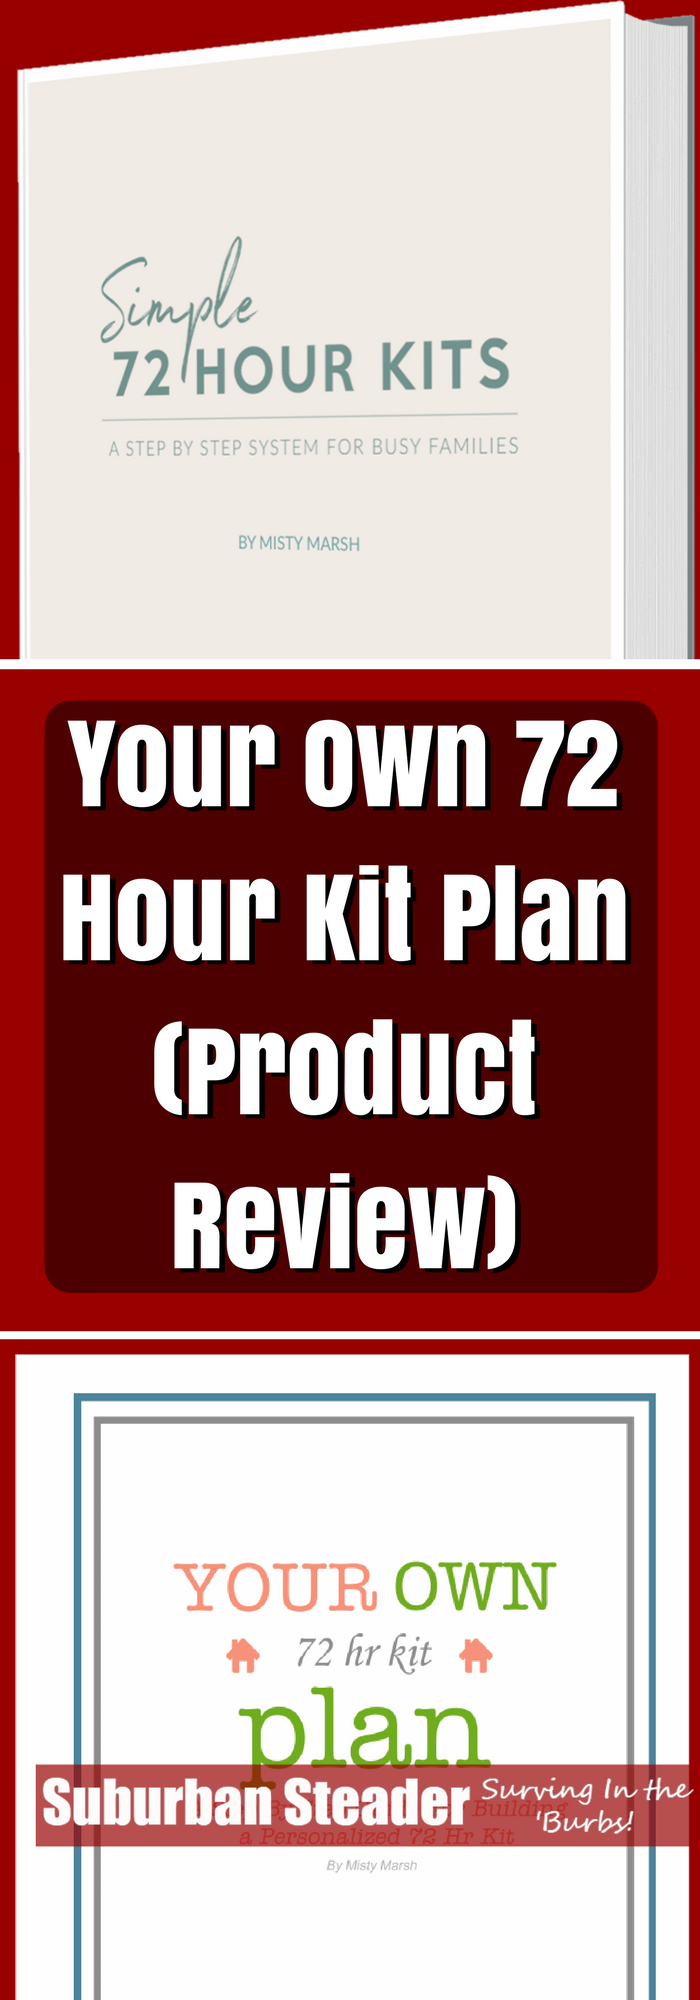 Your Own 72 Hour Kit Plan (Product Review)